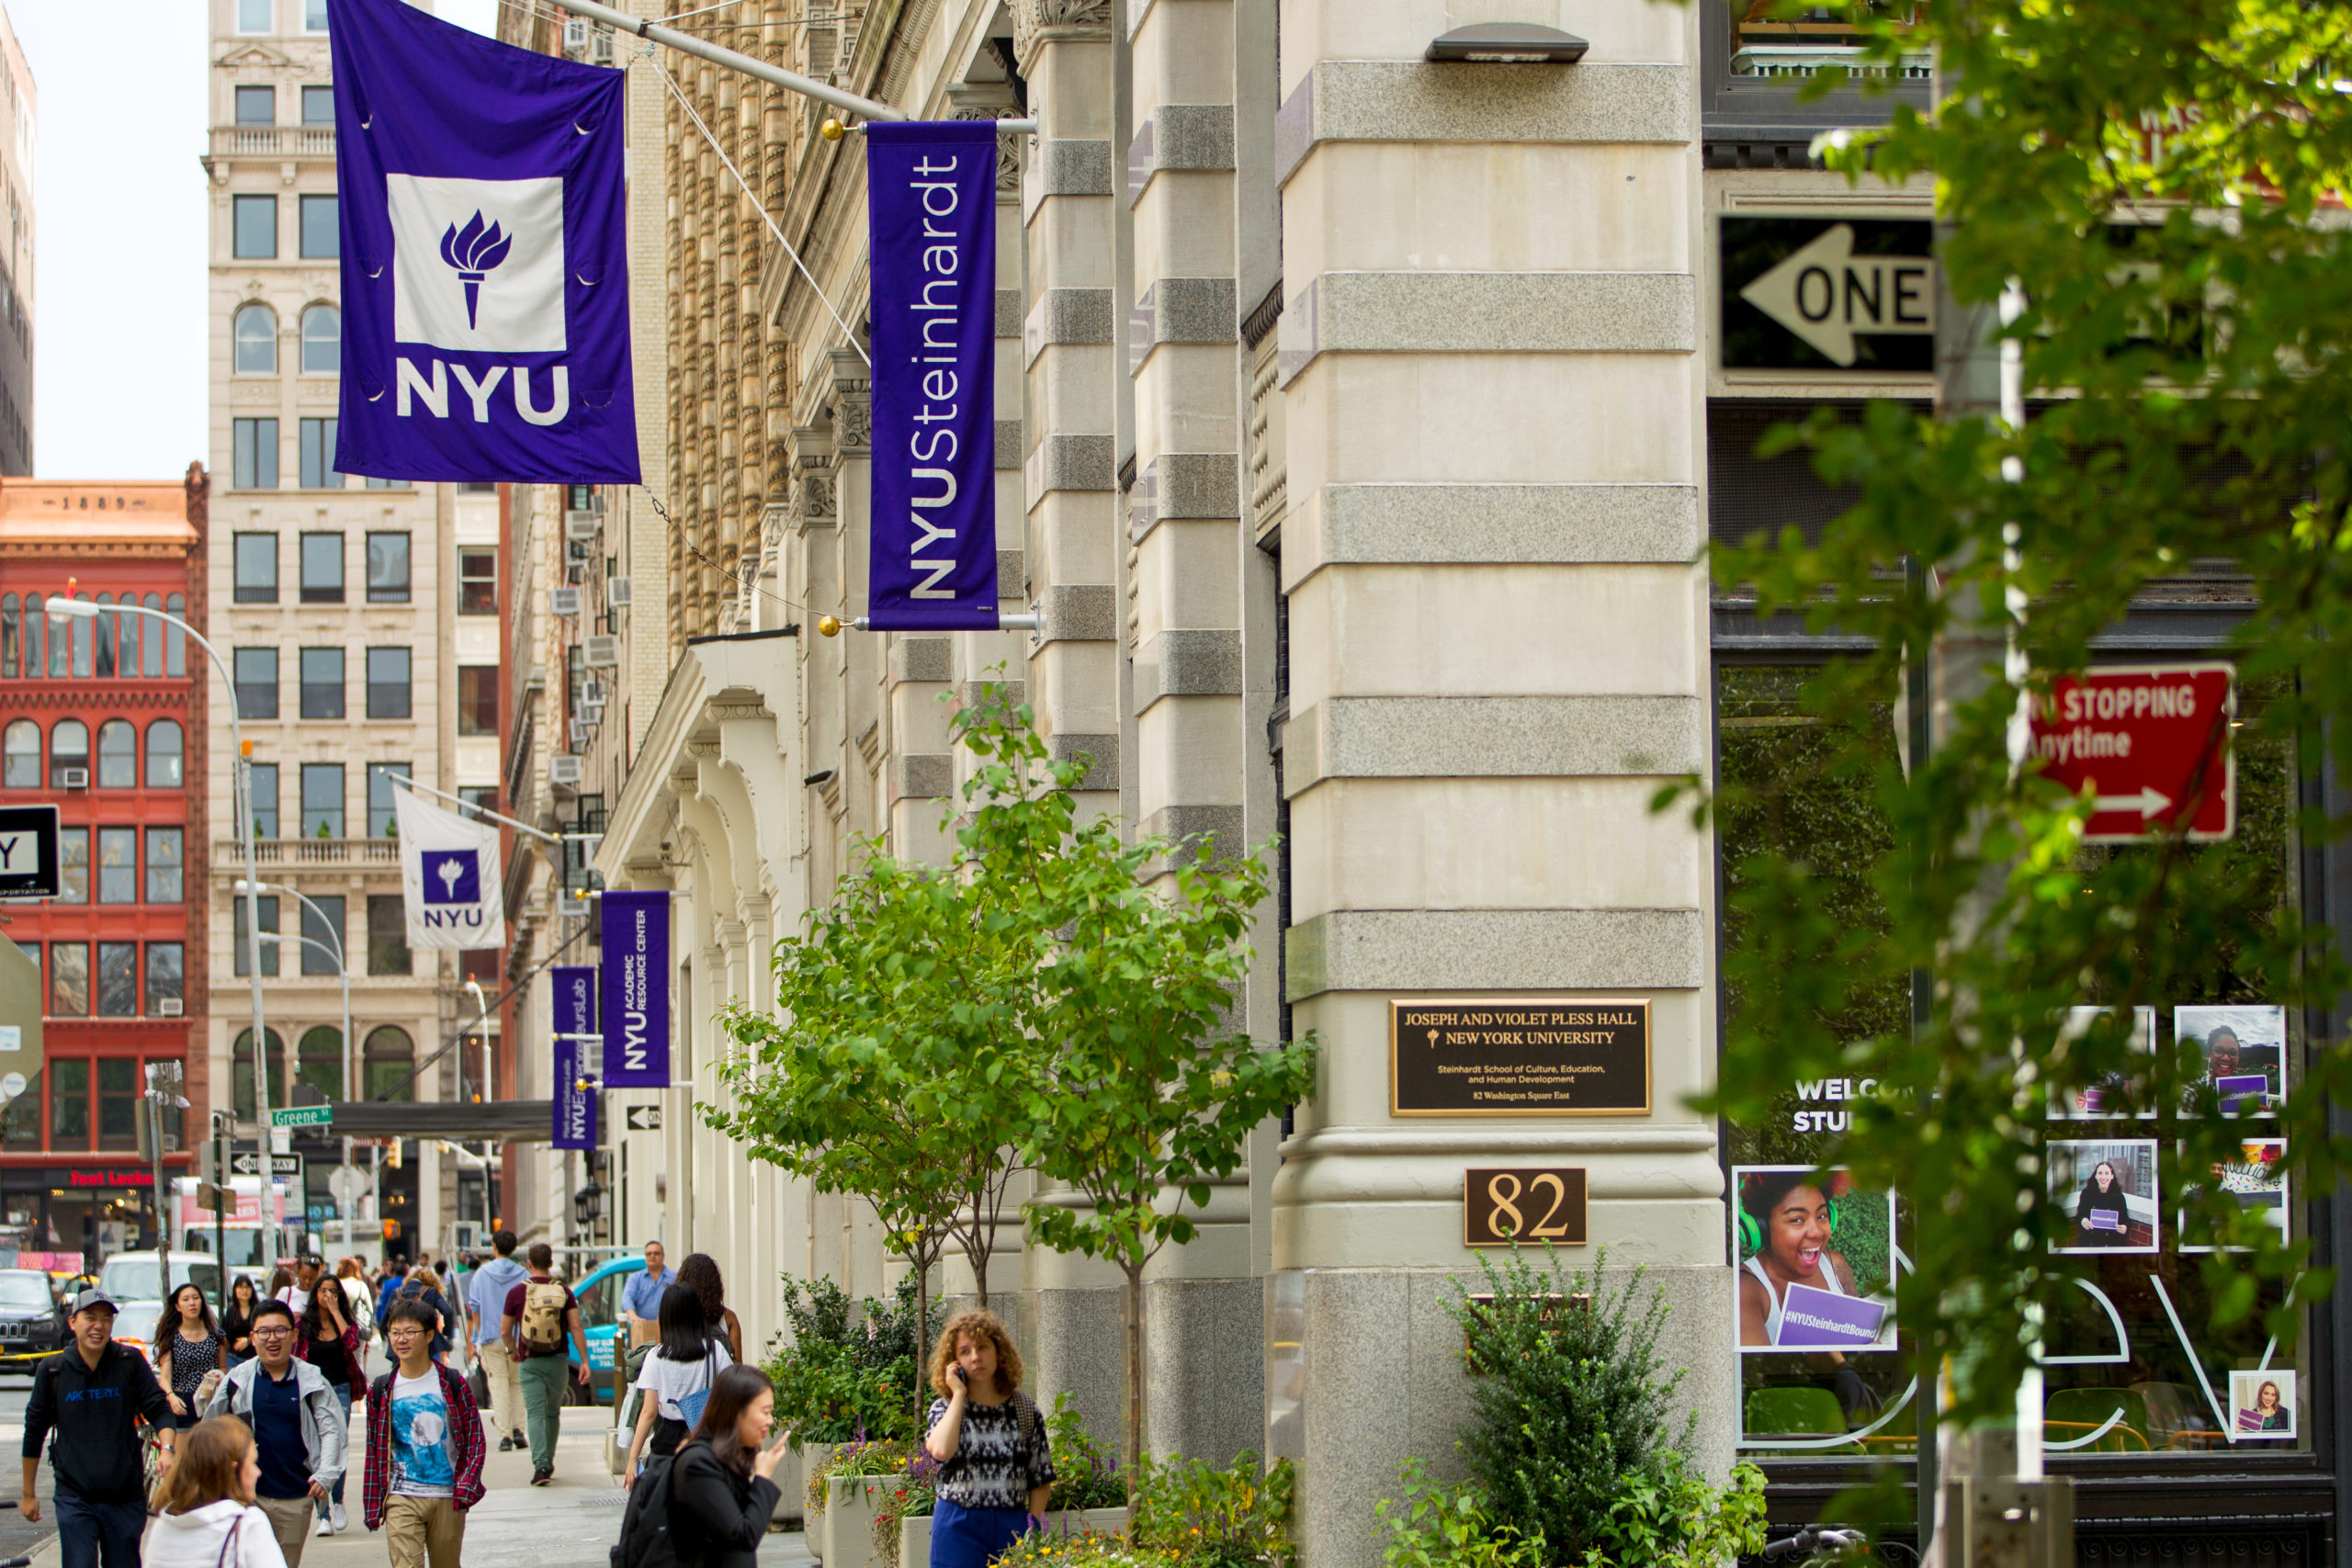 The exterior of the NYU Steinhardt building with people walking on the sidewalk.